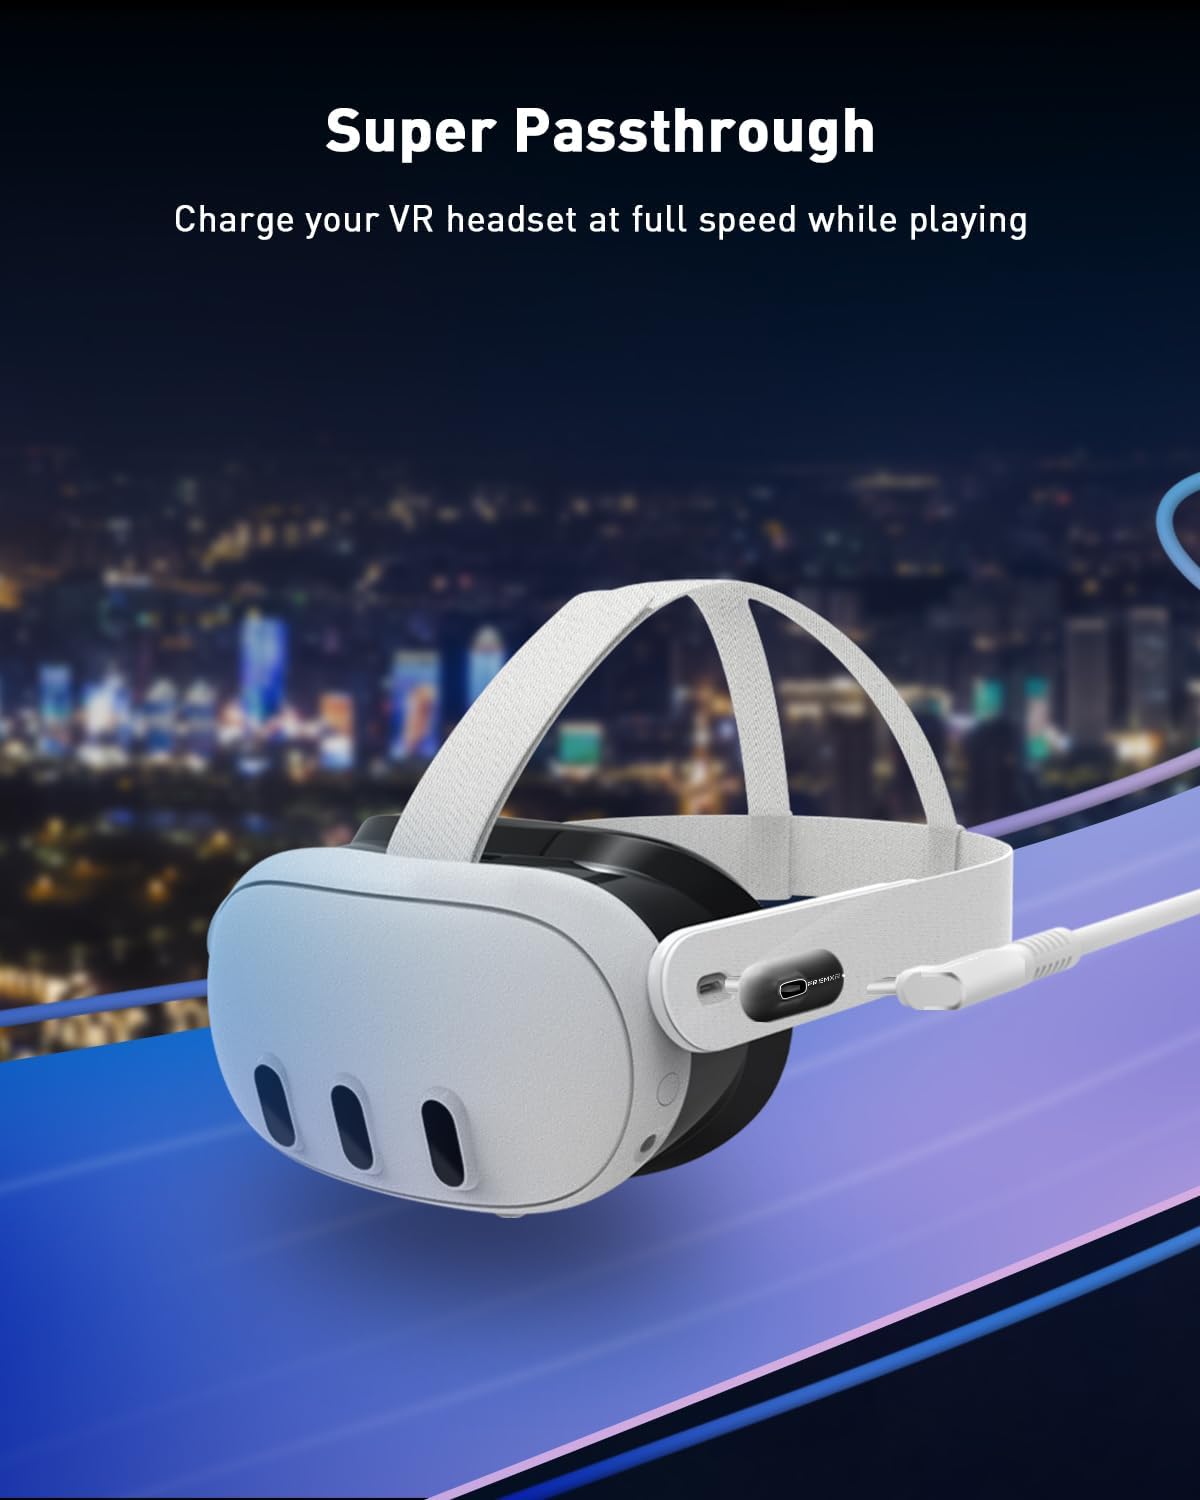 P Vega T1 Low Latency wireless Earbuds for VR Gaming